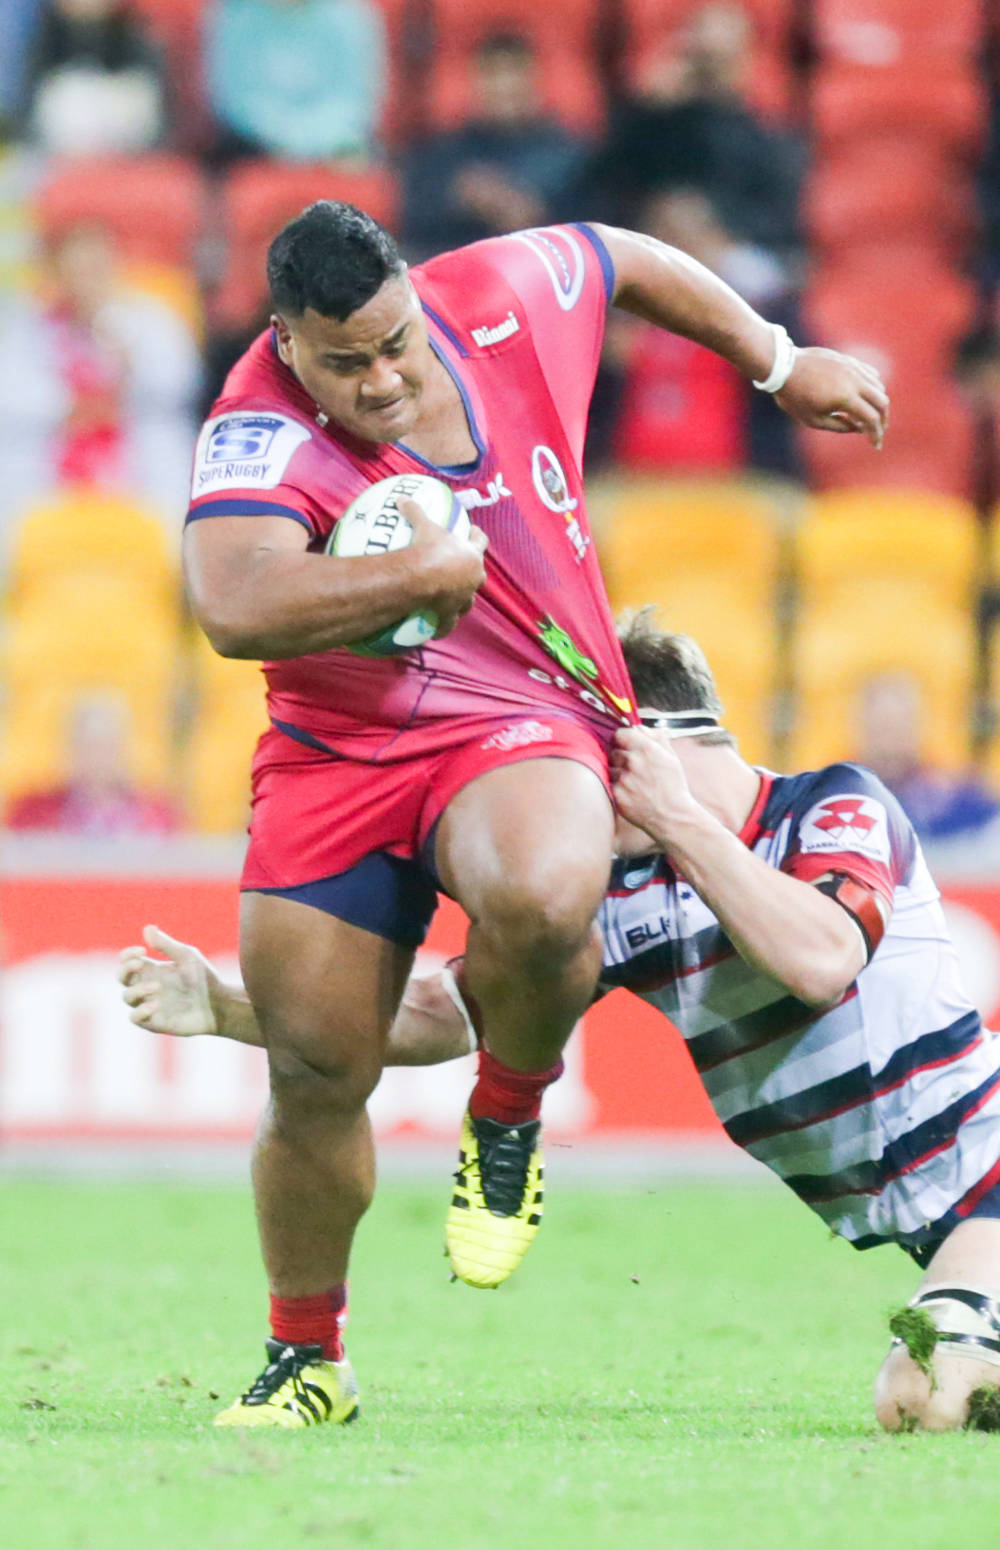 Taniela Tupuo breaking a tackle against the Rebels